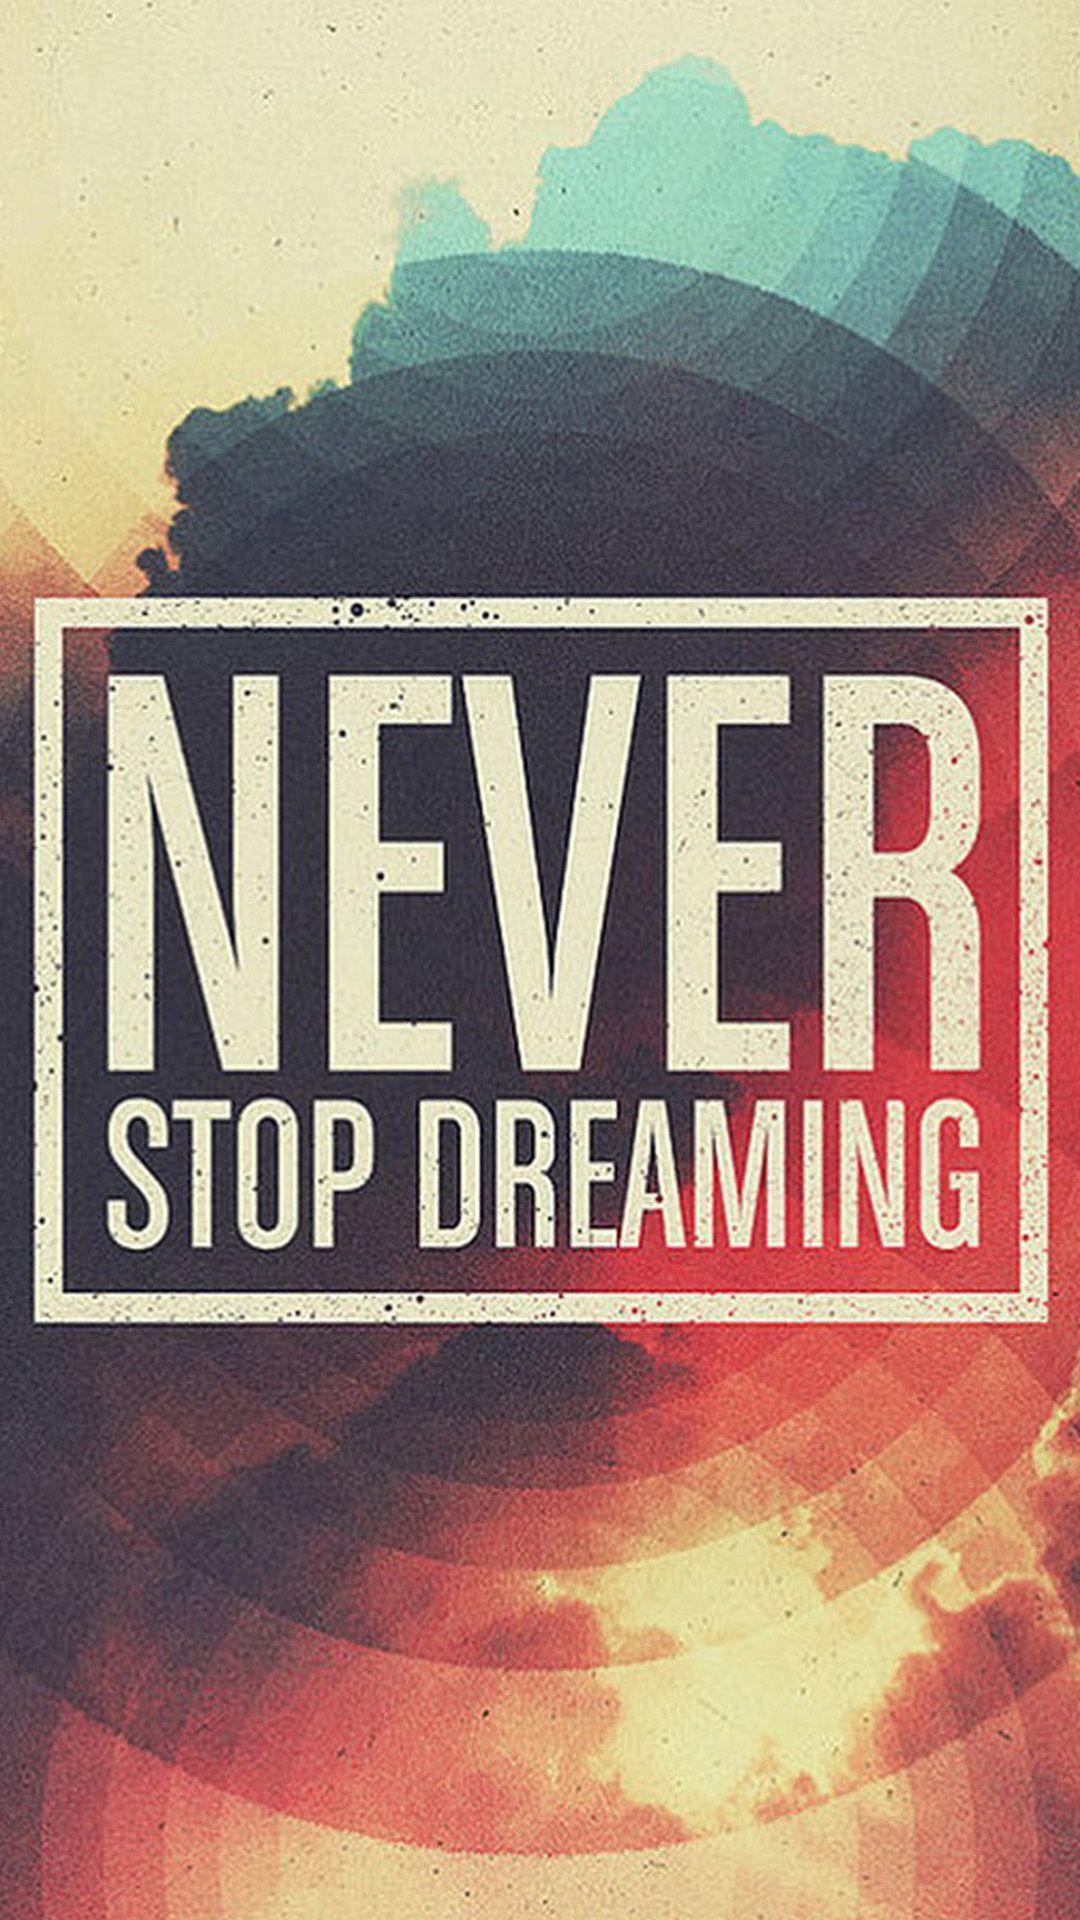 Never stop dreaming artwork htc one wallpaper